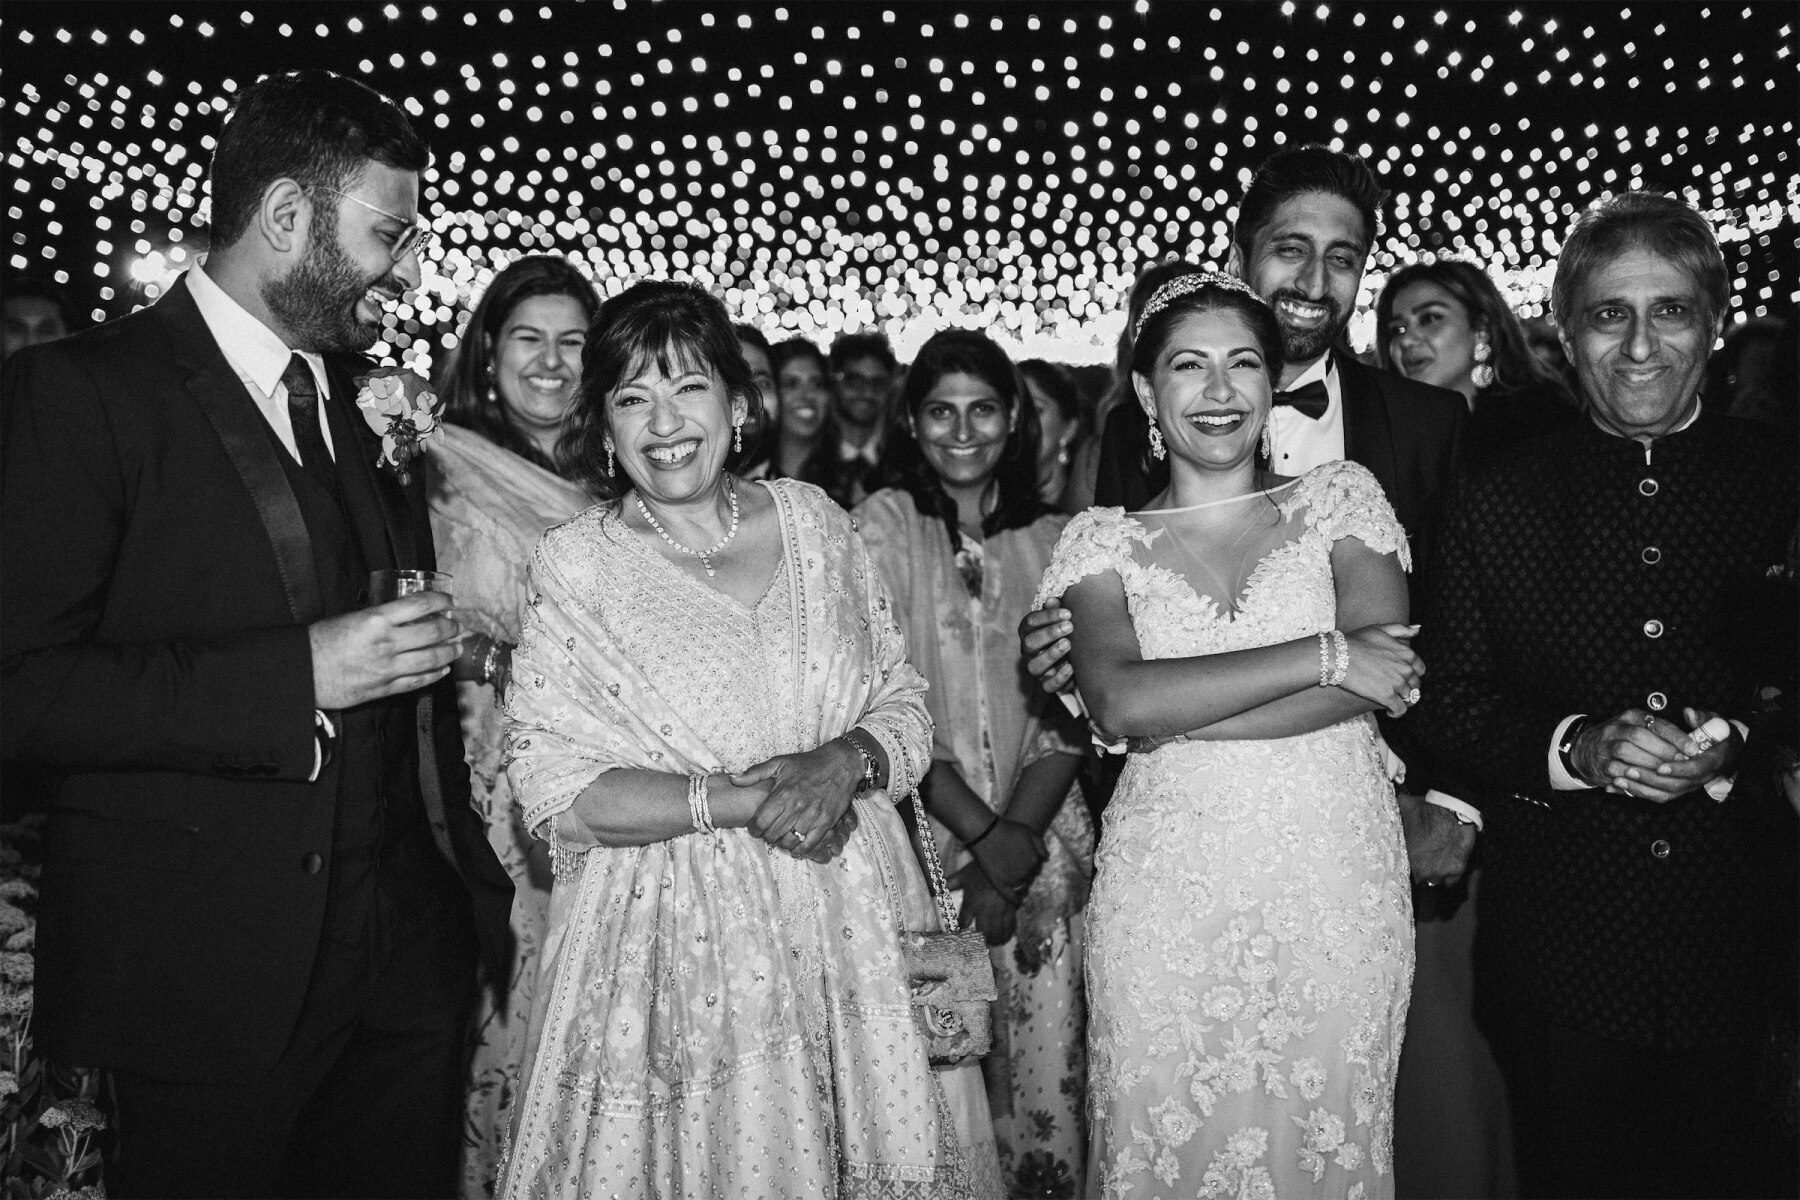 Newlyweds and their loved ones smile at the edge of the dancefloor at their indoor reception that was one of the final events of their multi-day colorful countryside wedding weekend.